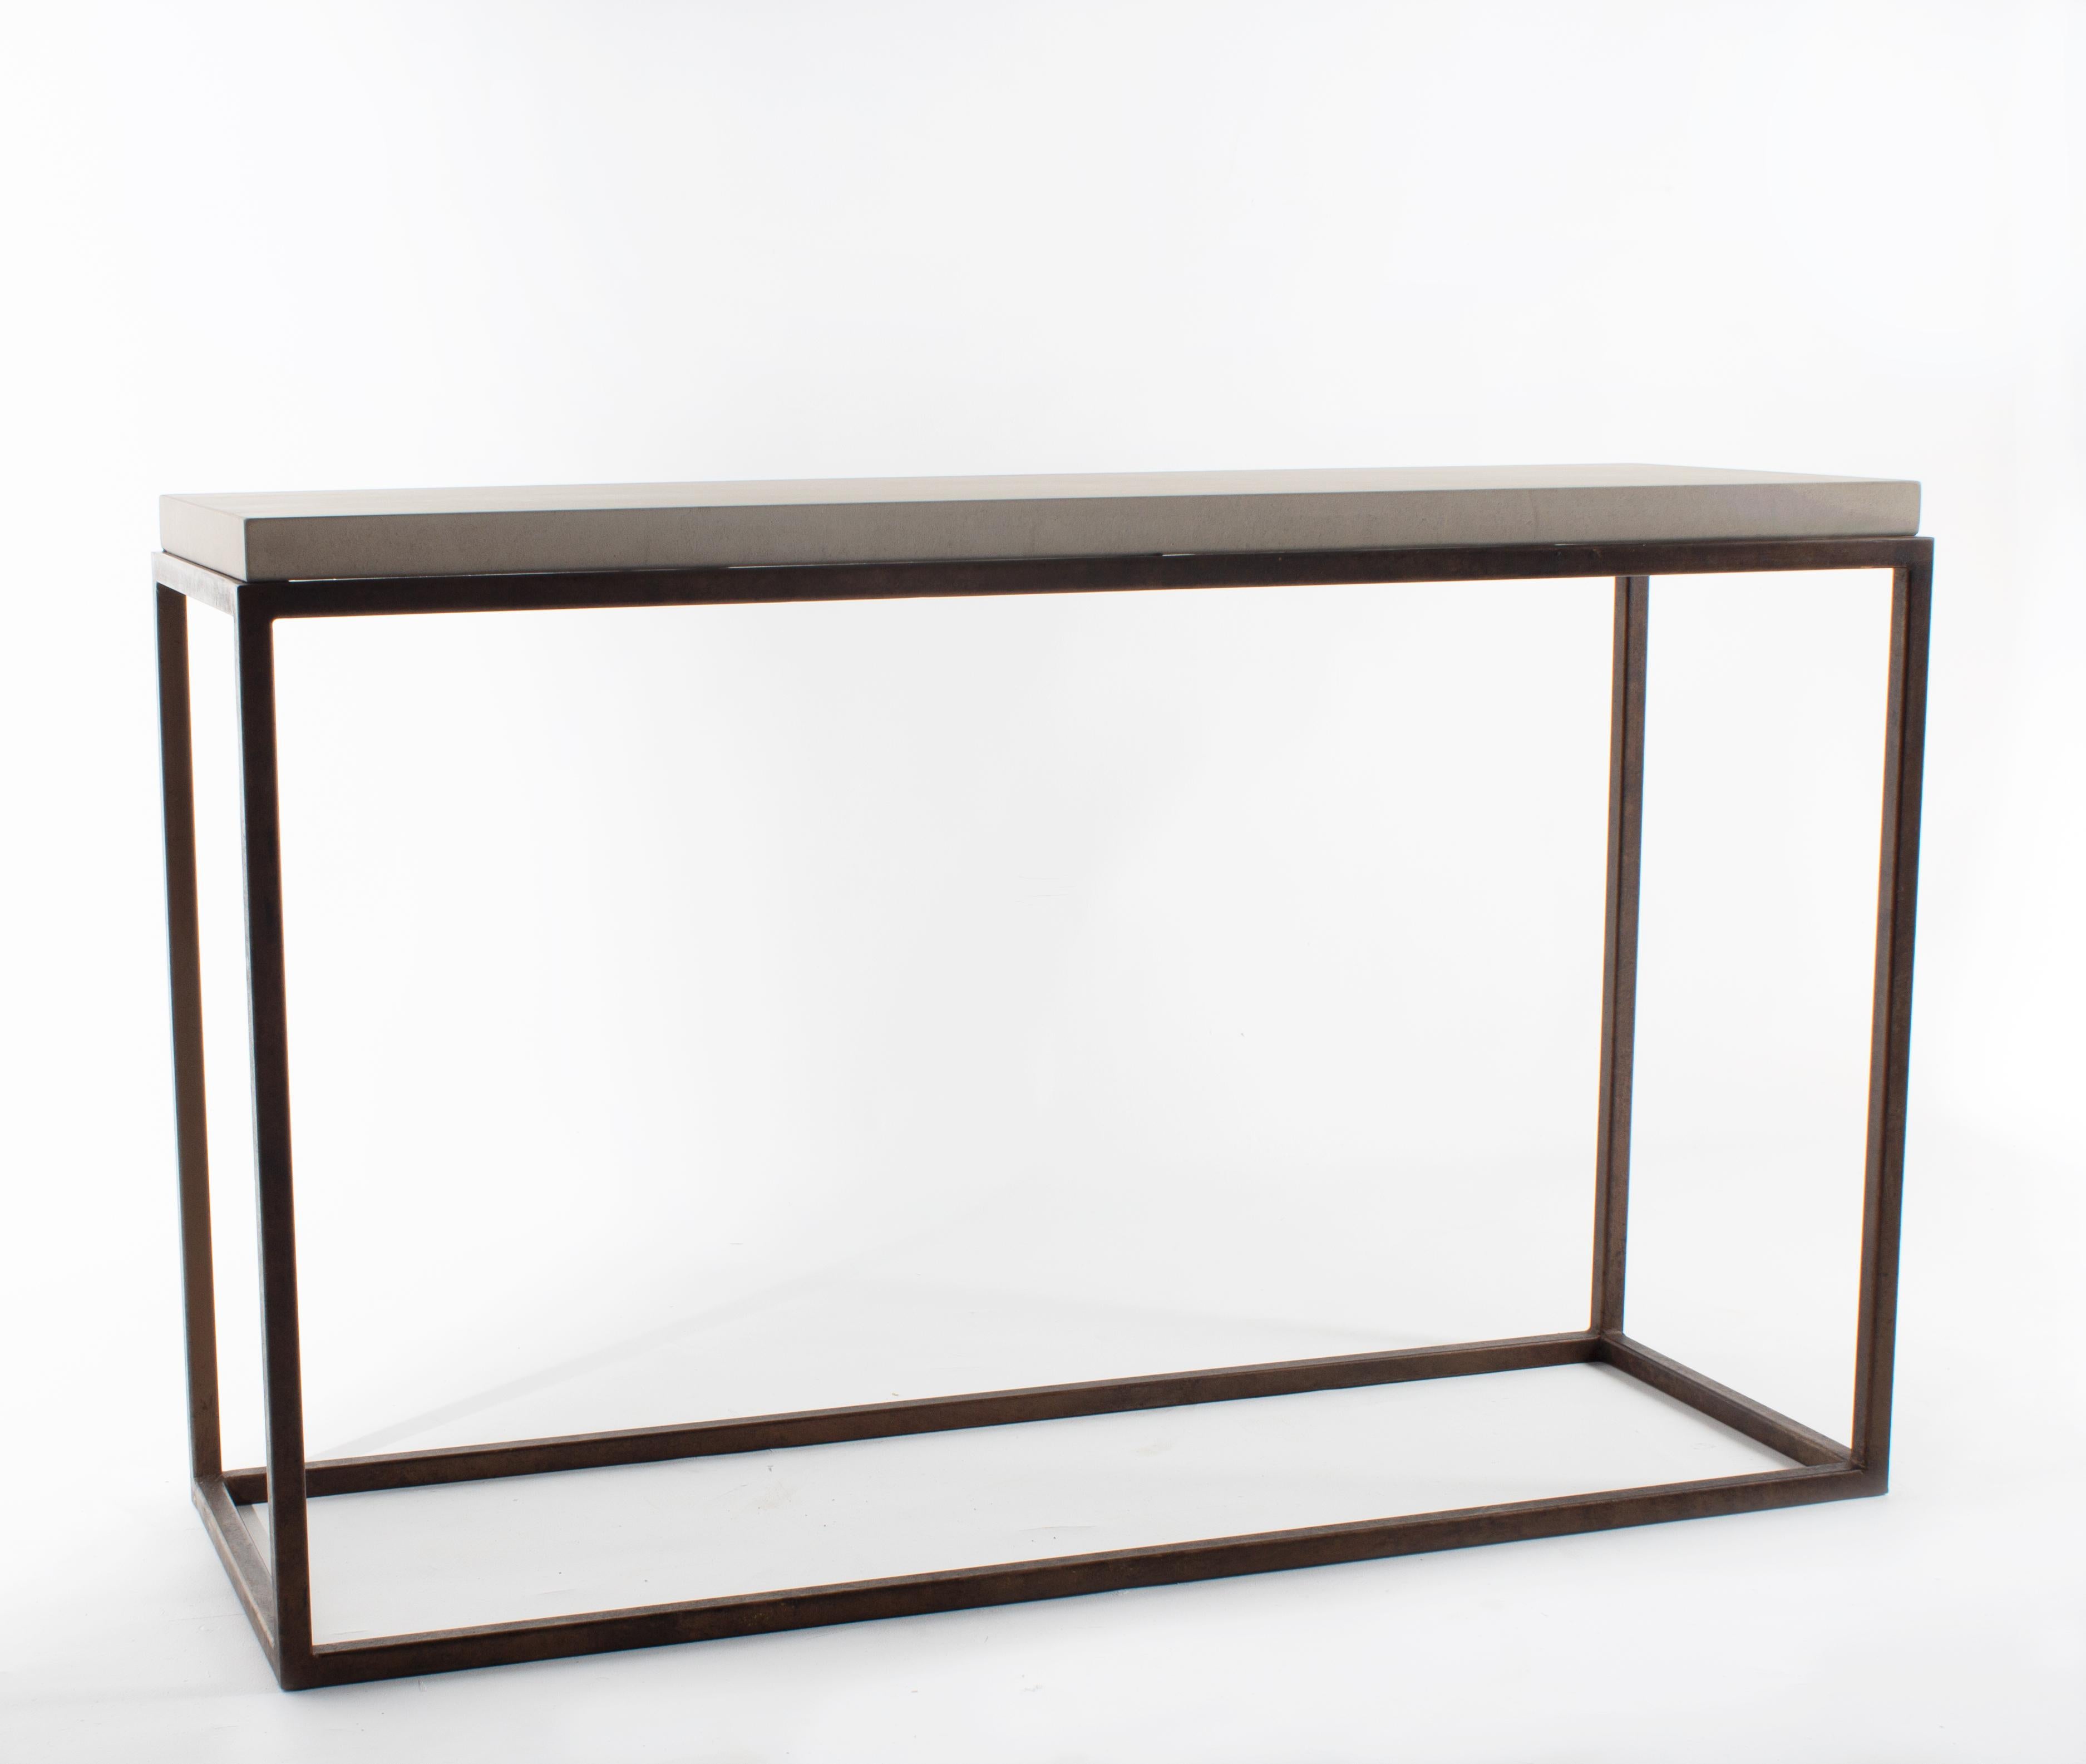 Minimalist console table with limestone top.
 